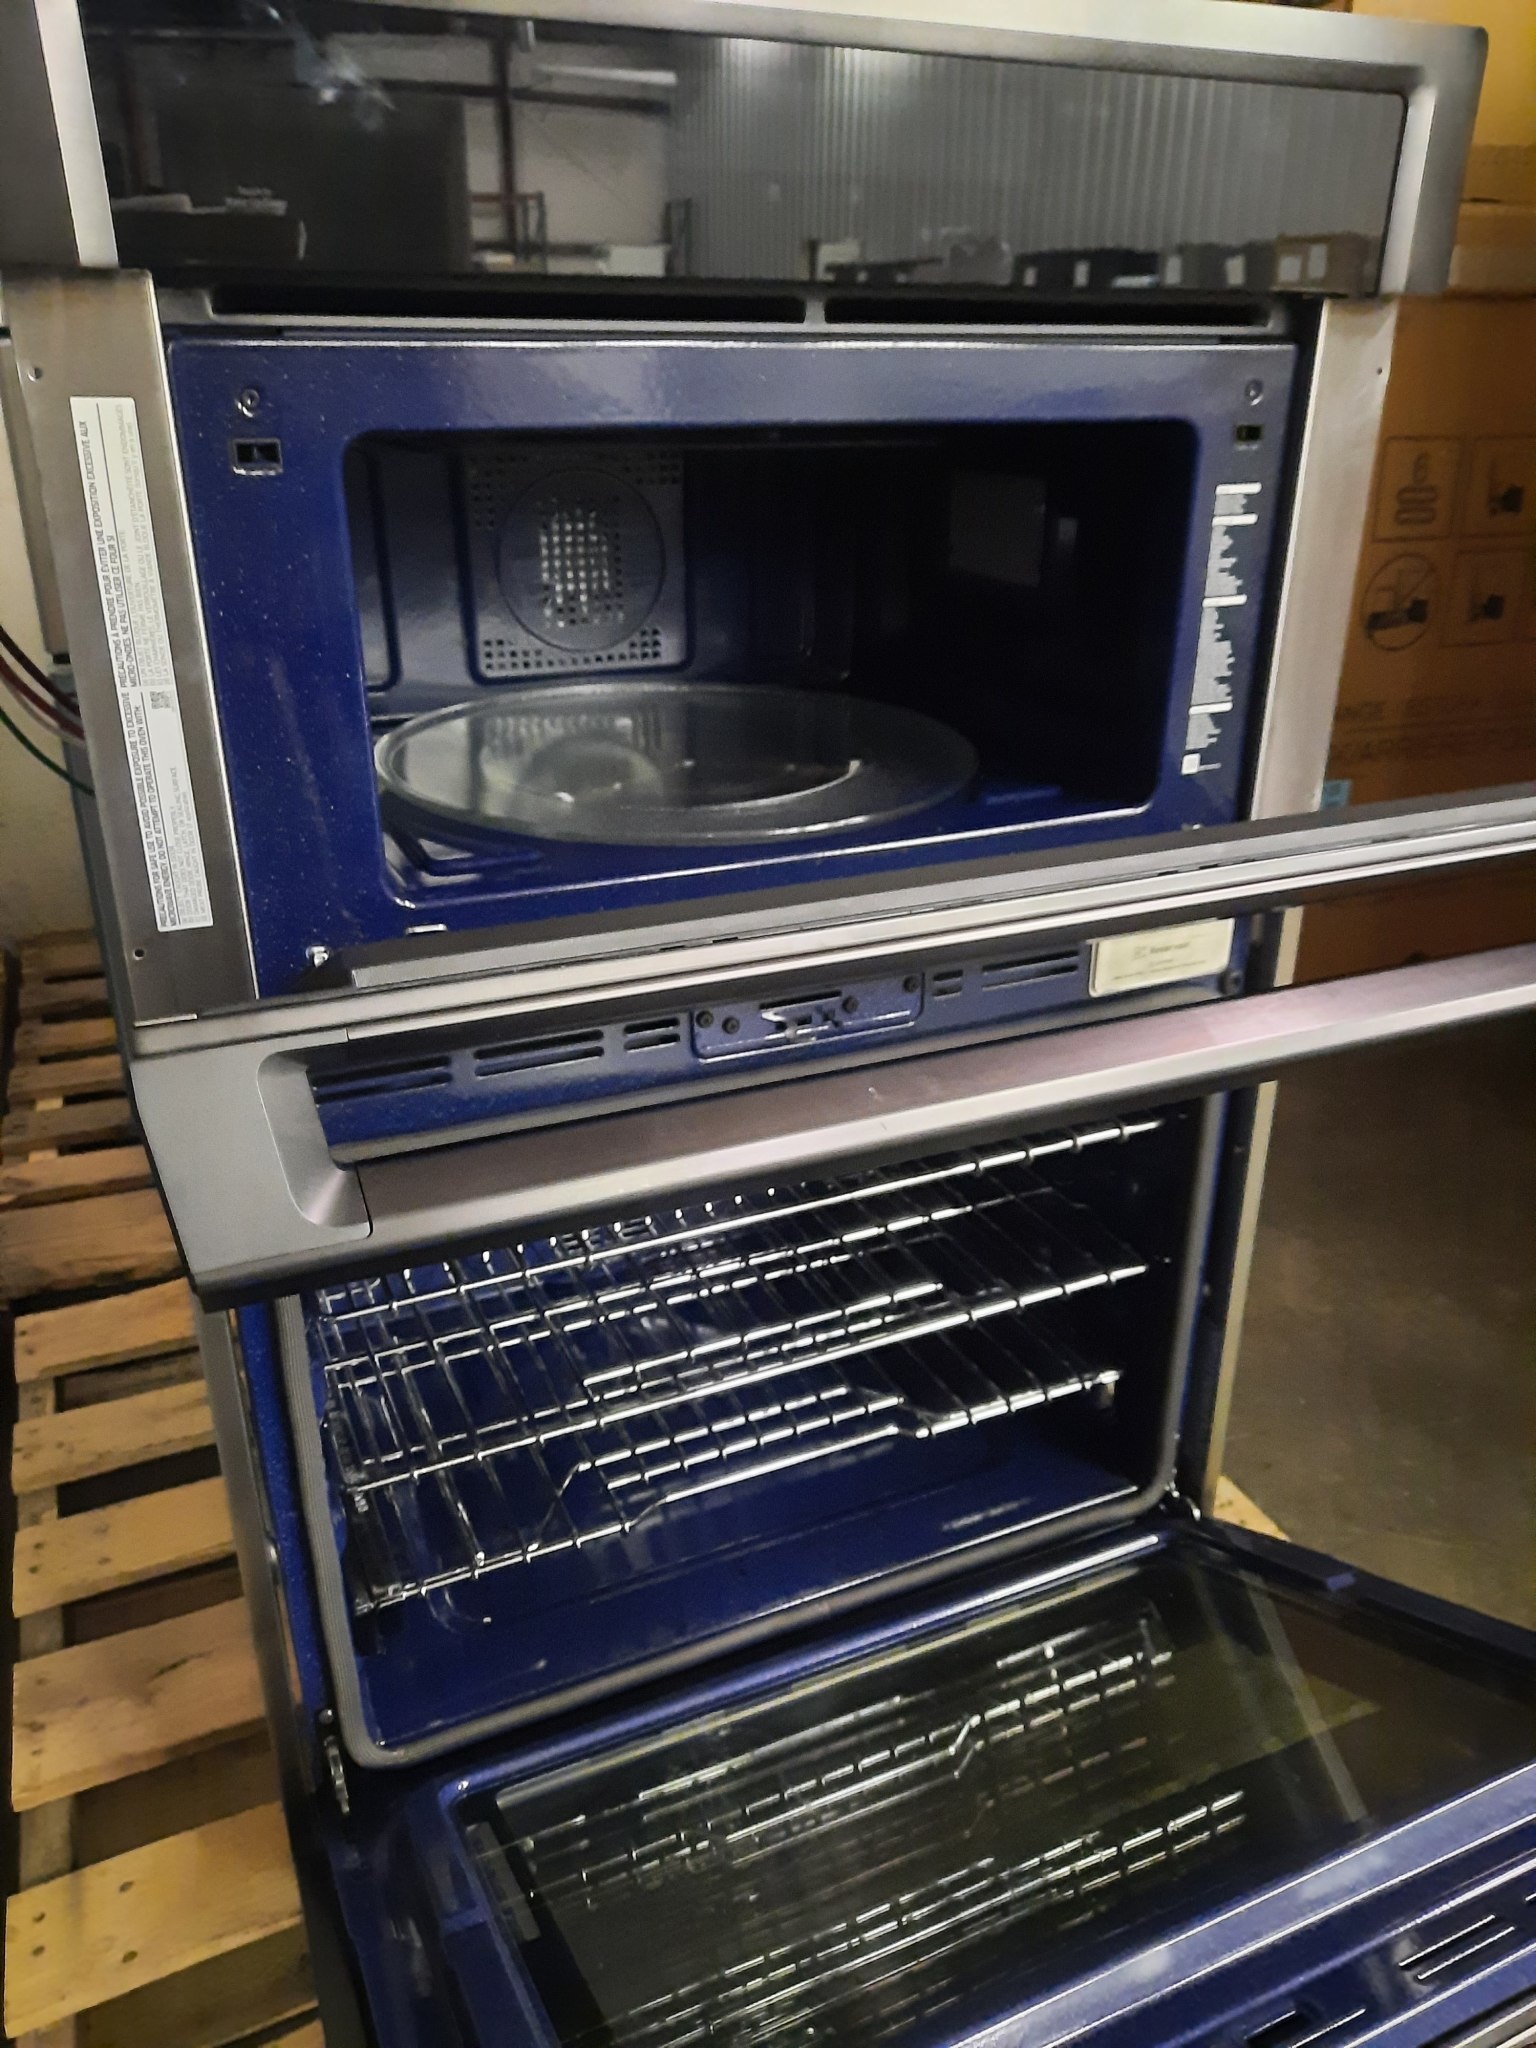 Samsung Bespoke 30 Microwave Combination Wall Oven in Stainless Steel, Silver